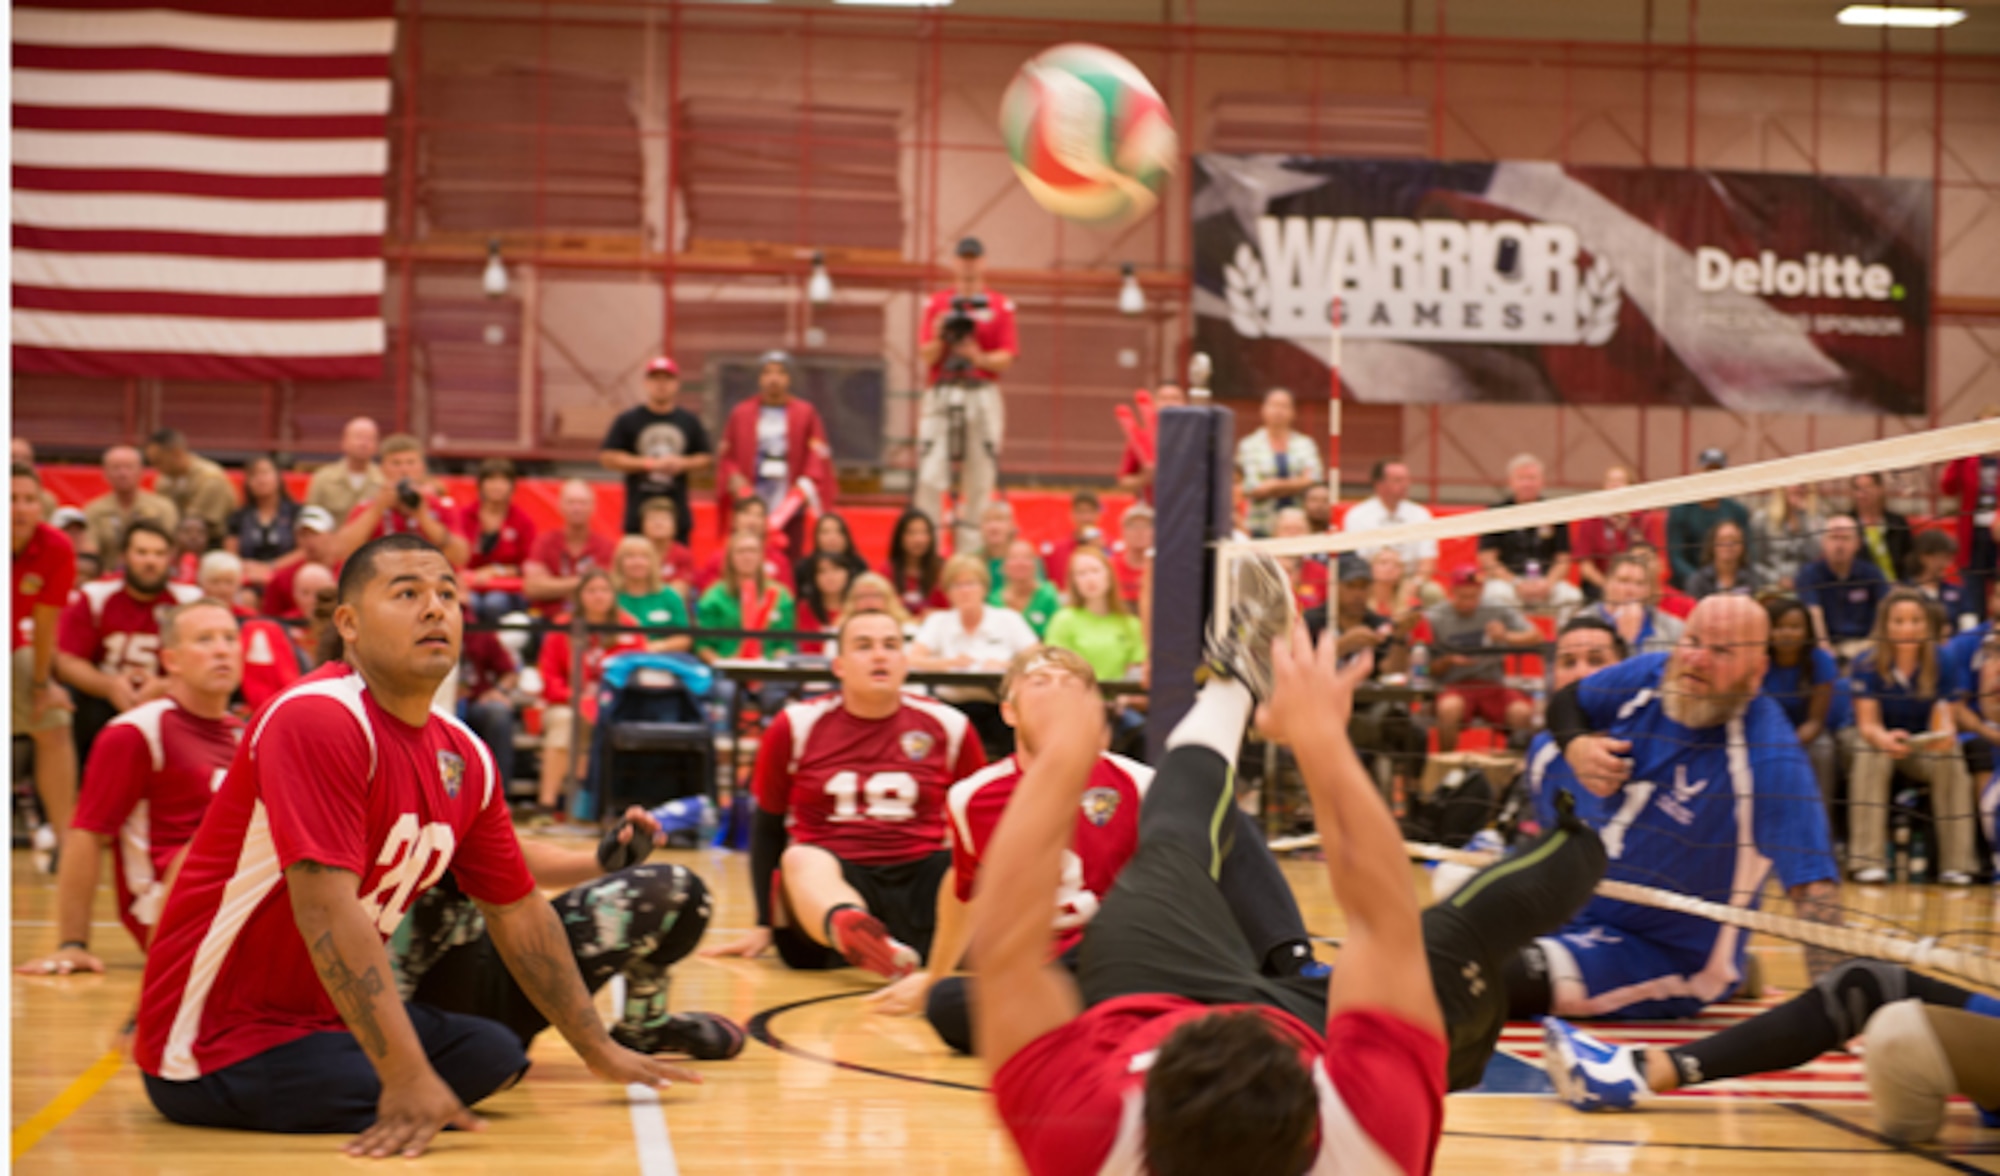 Eric Rodriguez (bottom right), from the Marine Corps volleyball team, tips the ball to teammate Jorge Salazar (middle left) during the teams' volleyball game against Air Force Sept. 29, 2014, at the Warrior Games in Colorado Springs, Colo. The Marines won the first out of three matches with a final of 25-23. (U.S. Marine Corps photo/Cpl. Cuong Le)